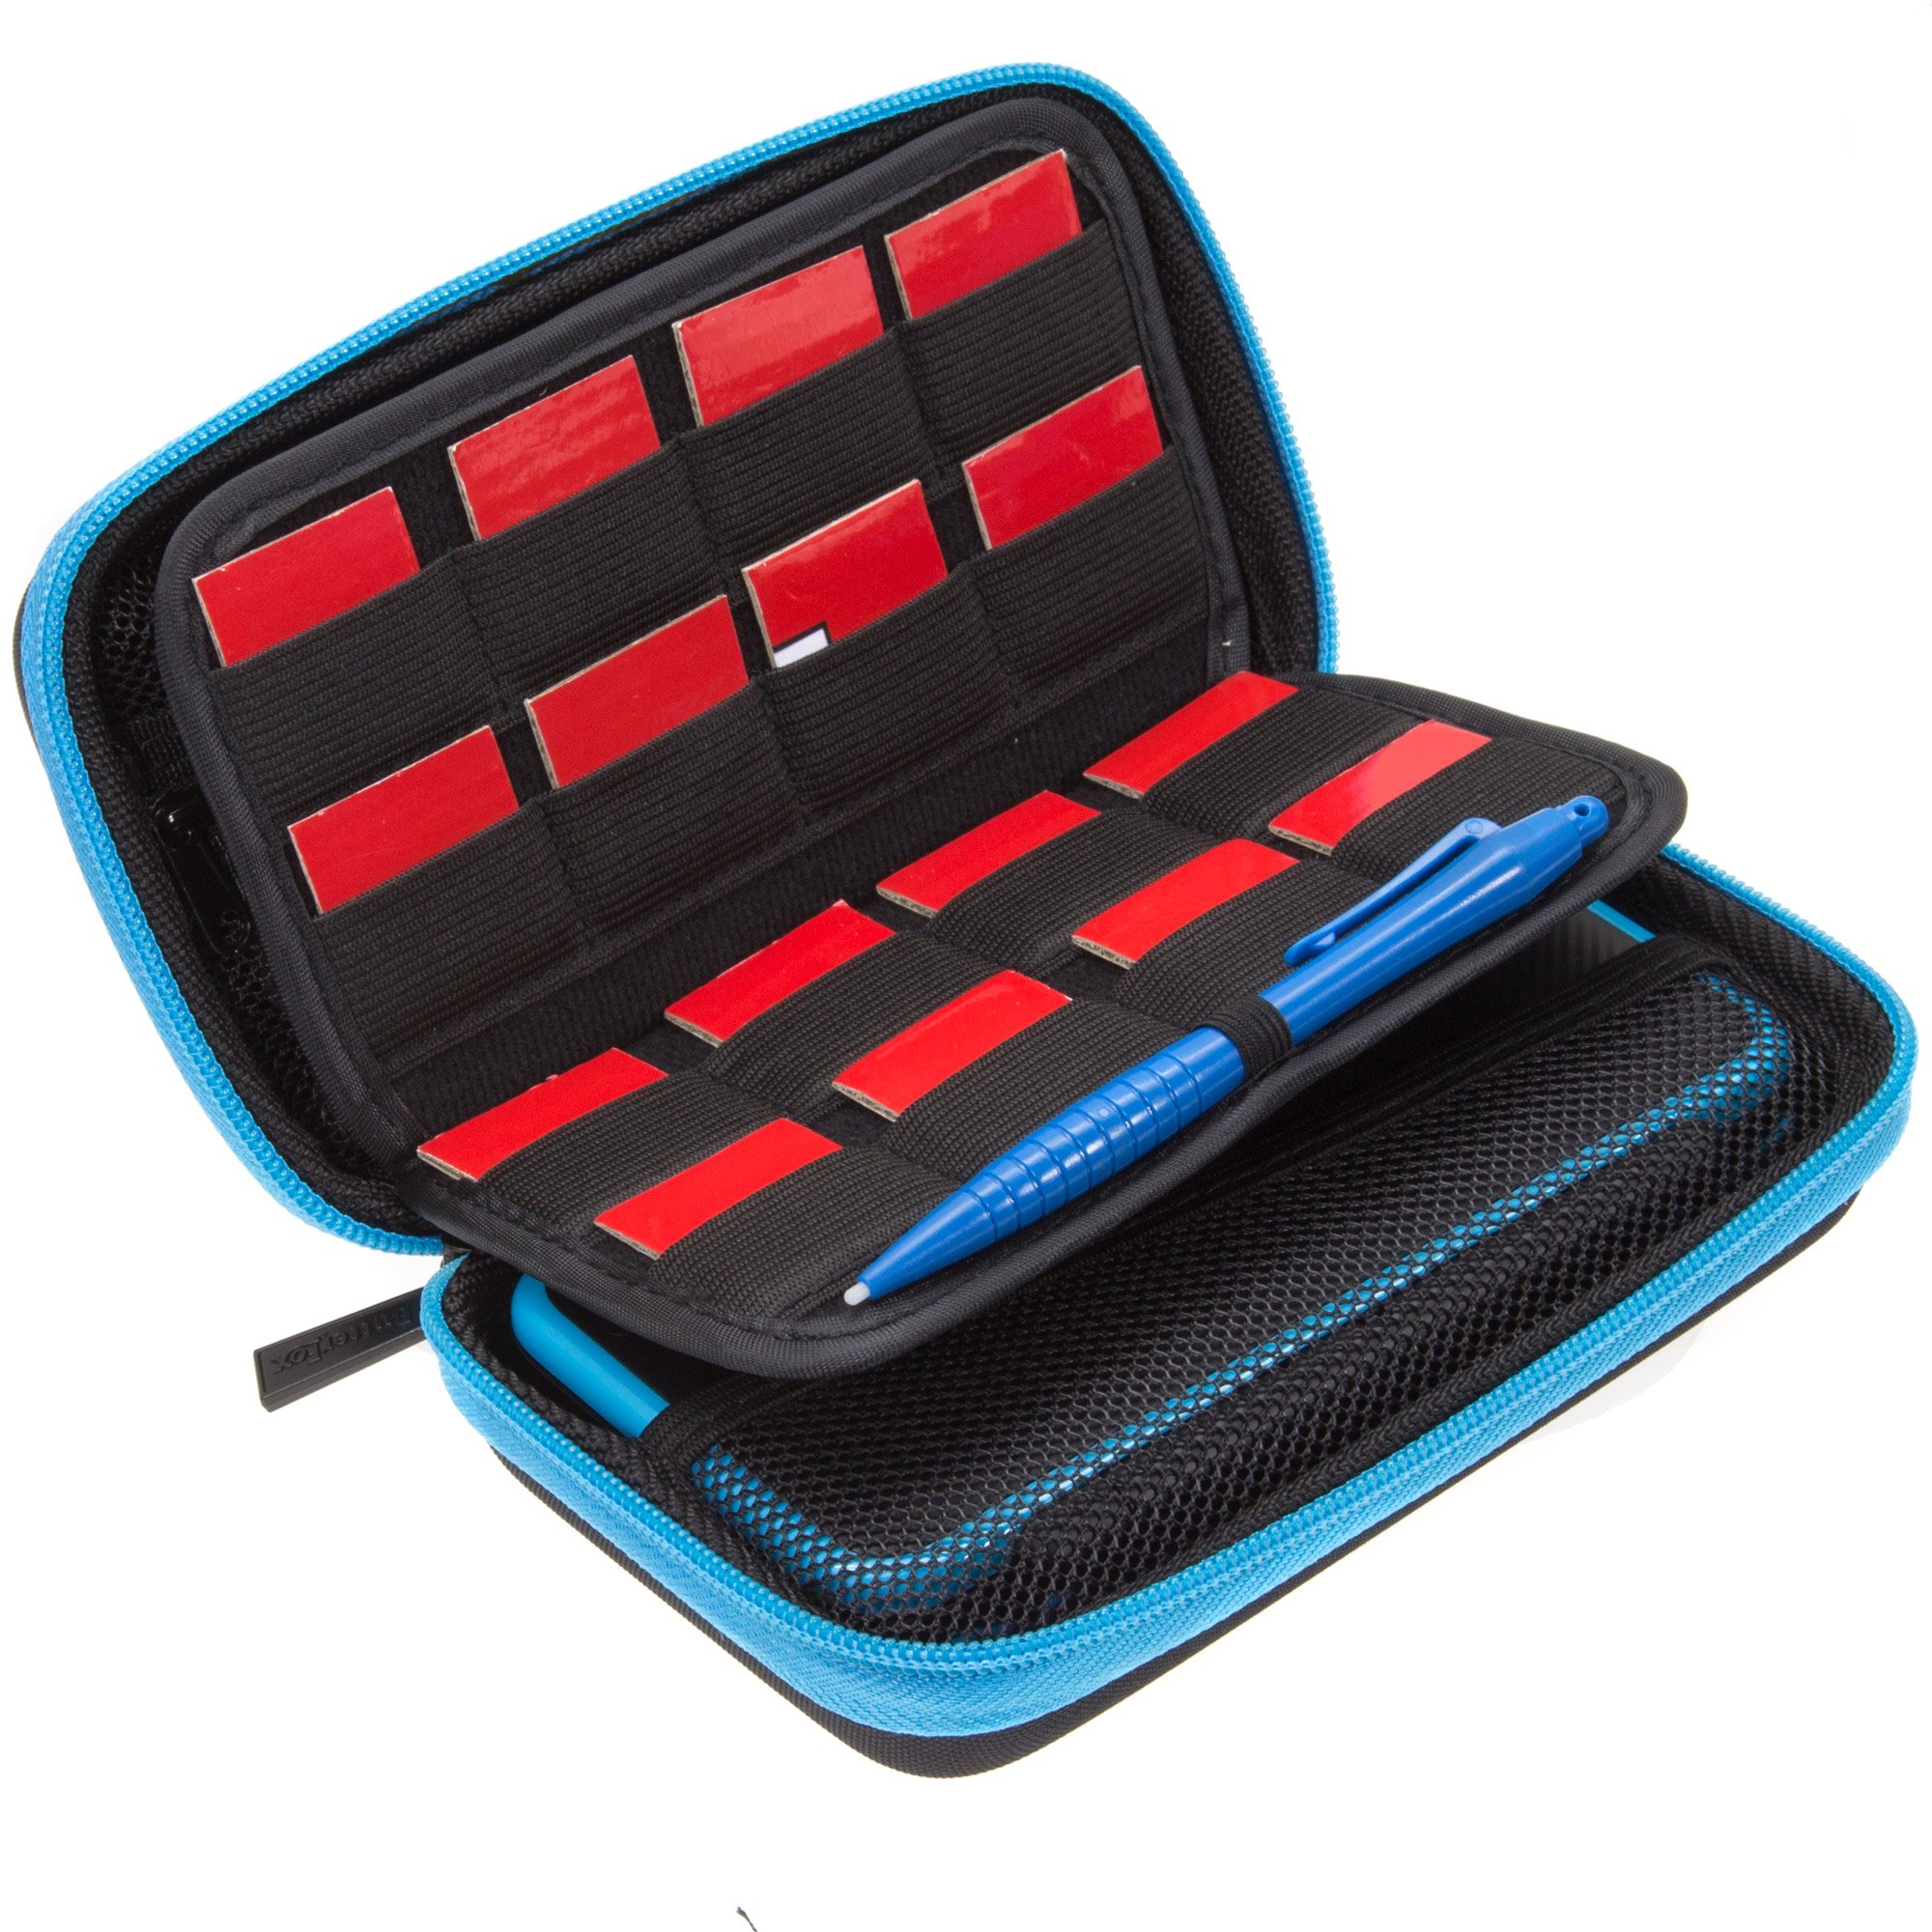 BRENDO Hard Carrying Case for New Nintendo 2DS XL + Large Stylus, Fits Wall Charger, 24 Game Cartridge Case Holder, Large Accessories Pocket - Black + Turquoise